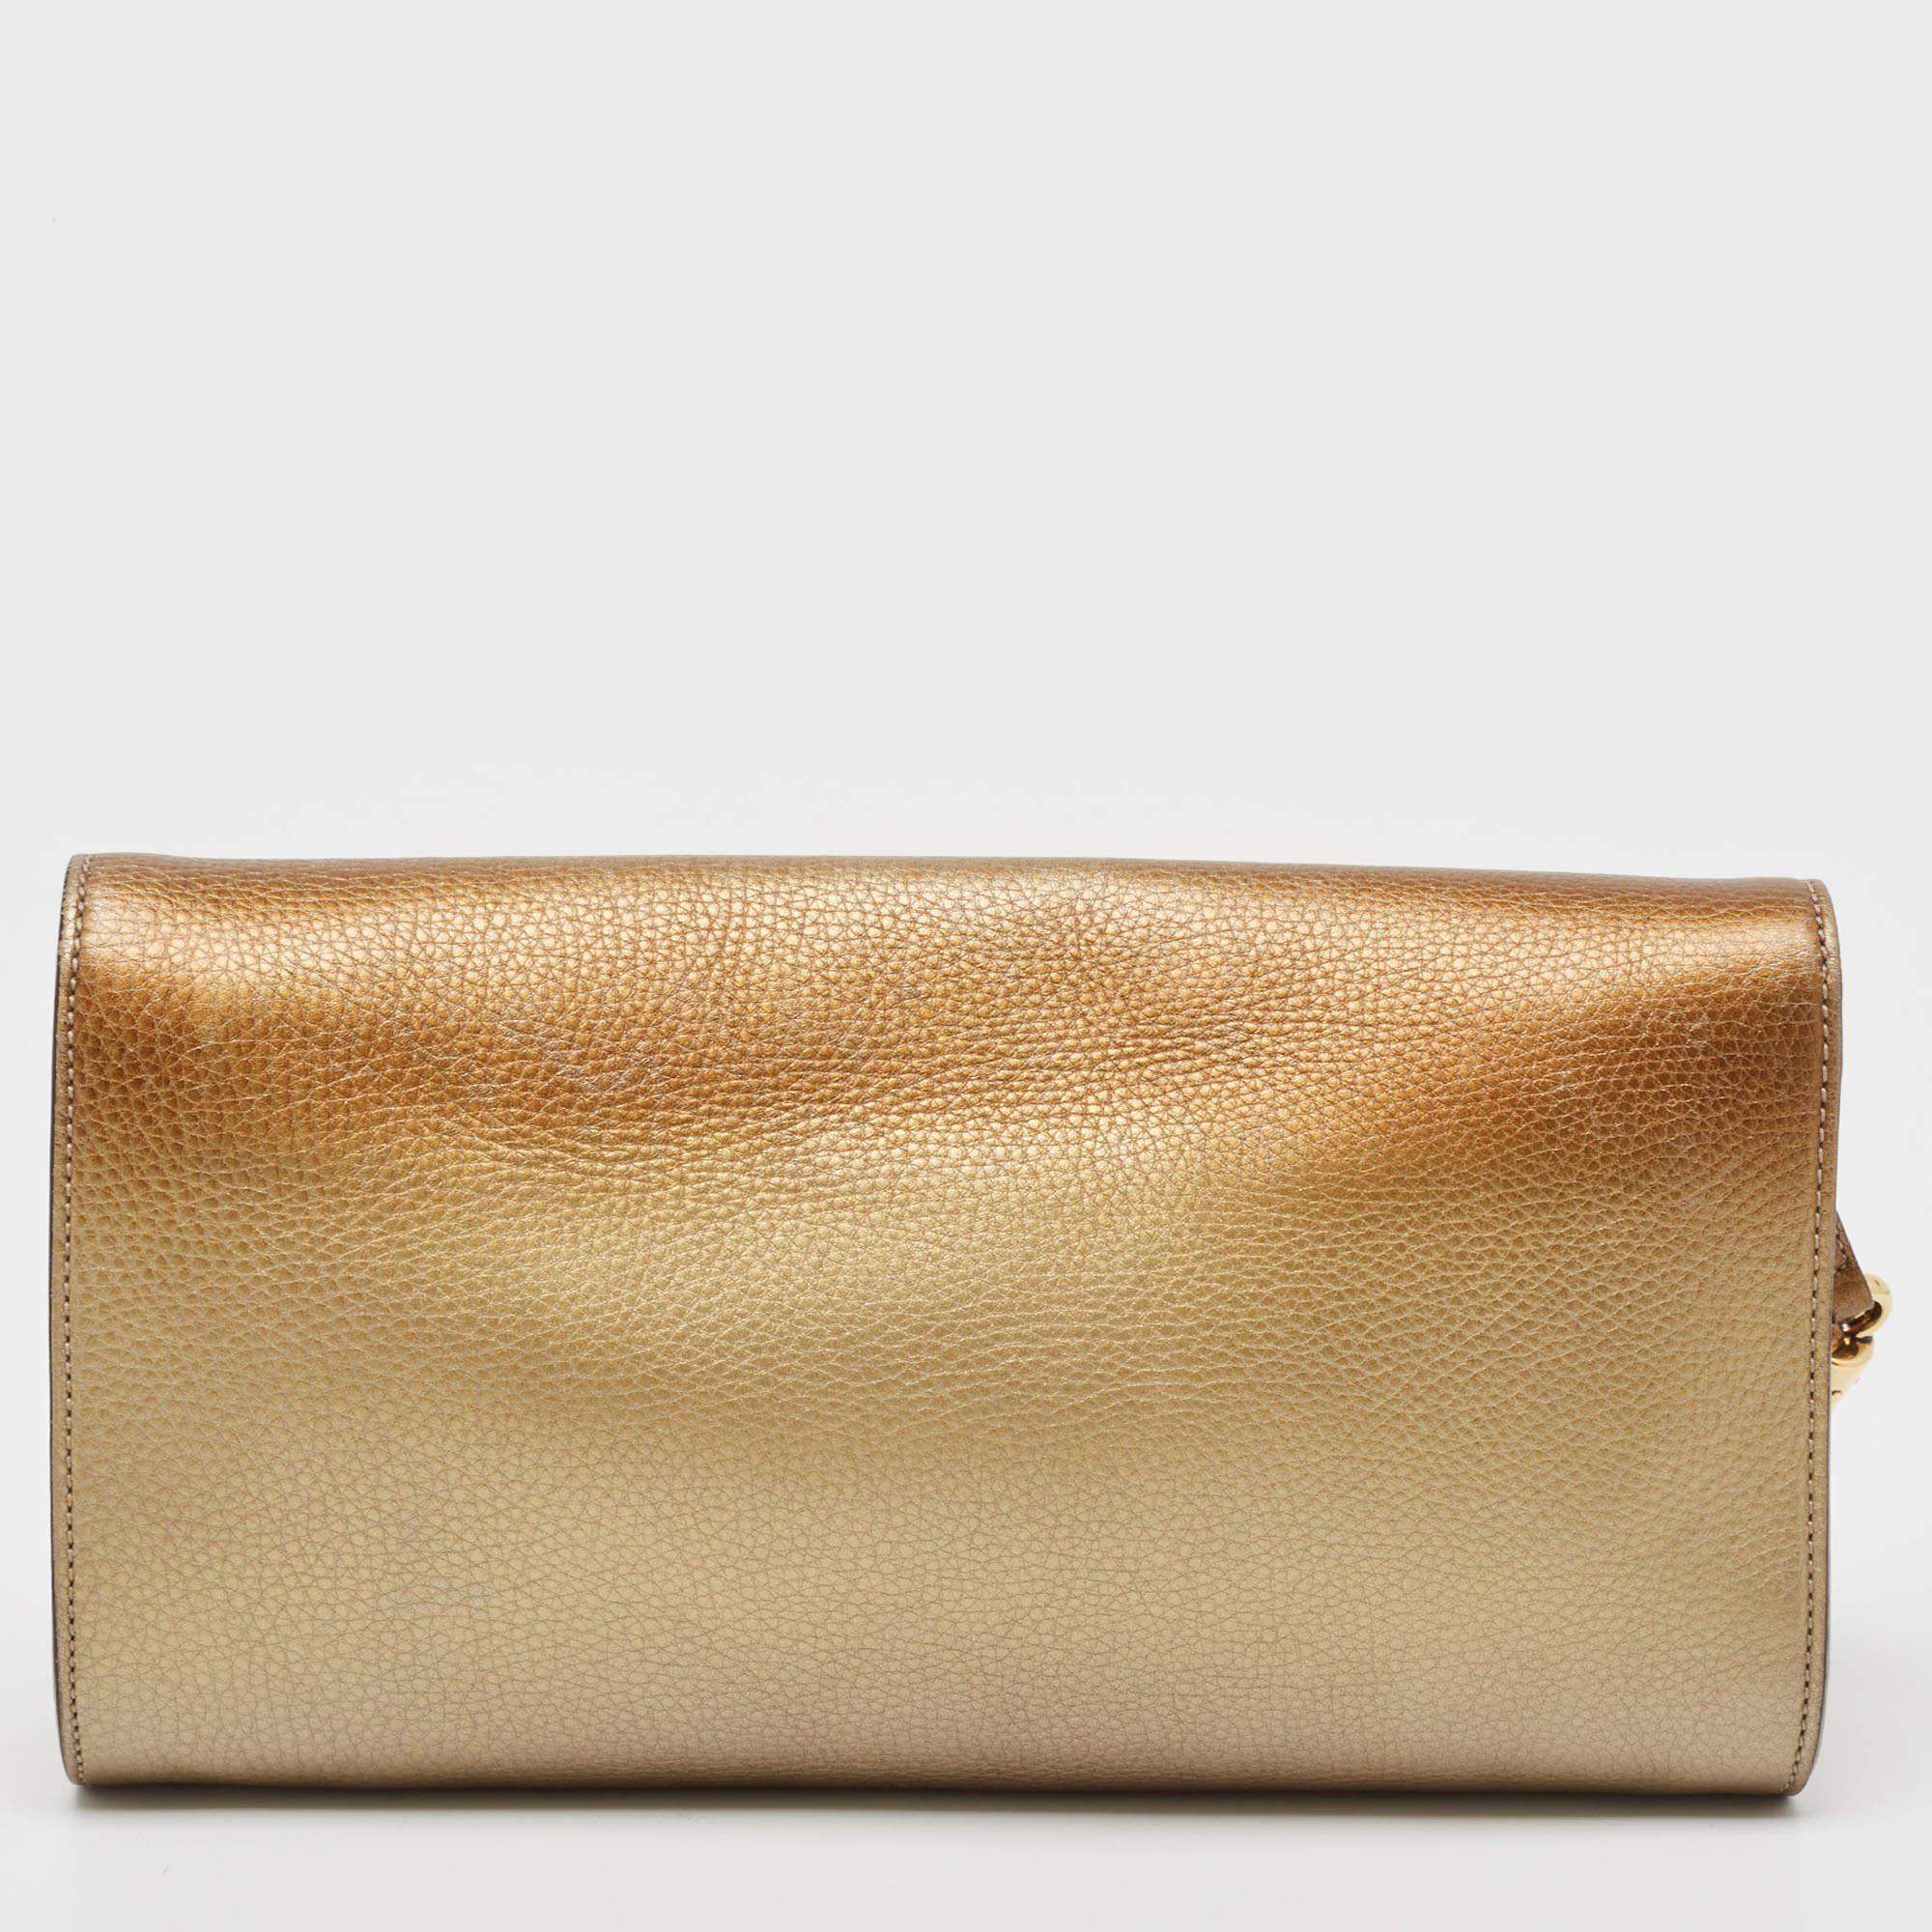 Gucci Gold Ombre Leather Soho Tassel Clutch 8